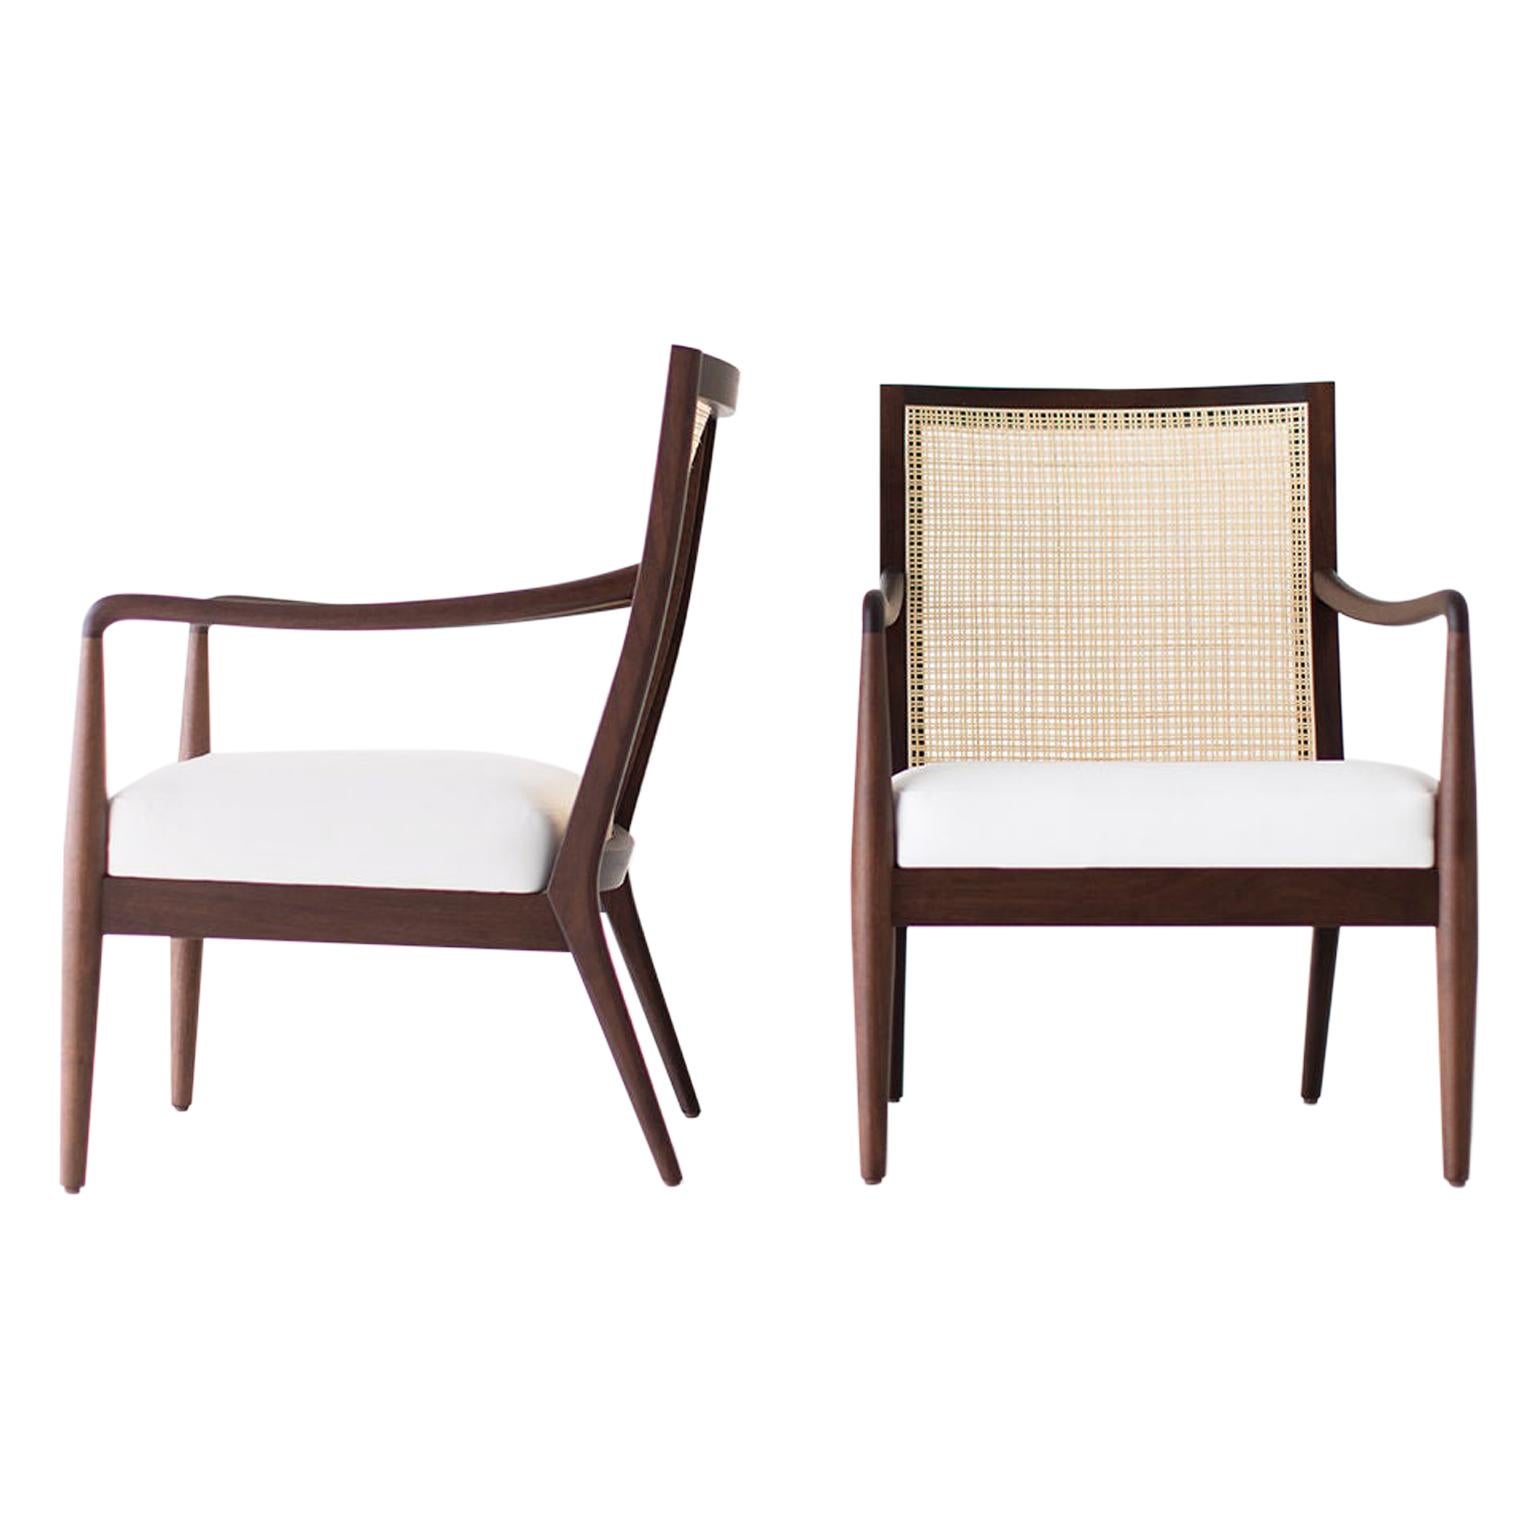 Lawrence Peabody Modern Cane Back Armchairs for Craft Associates